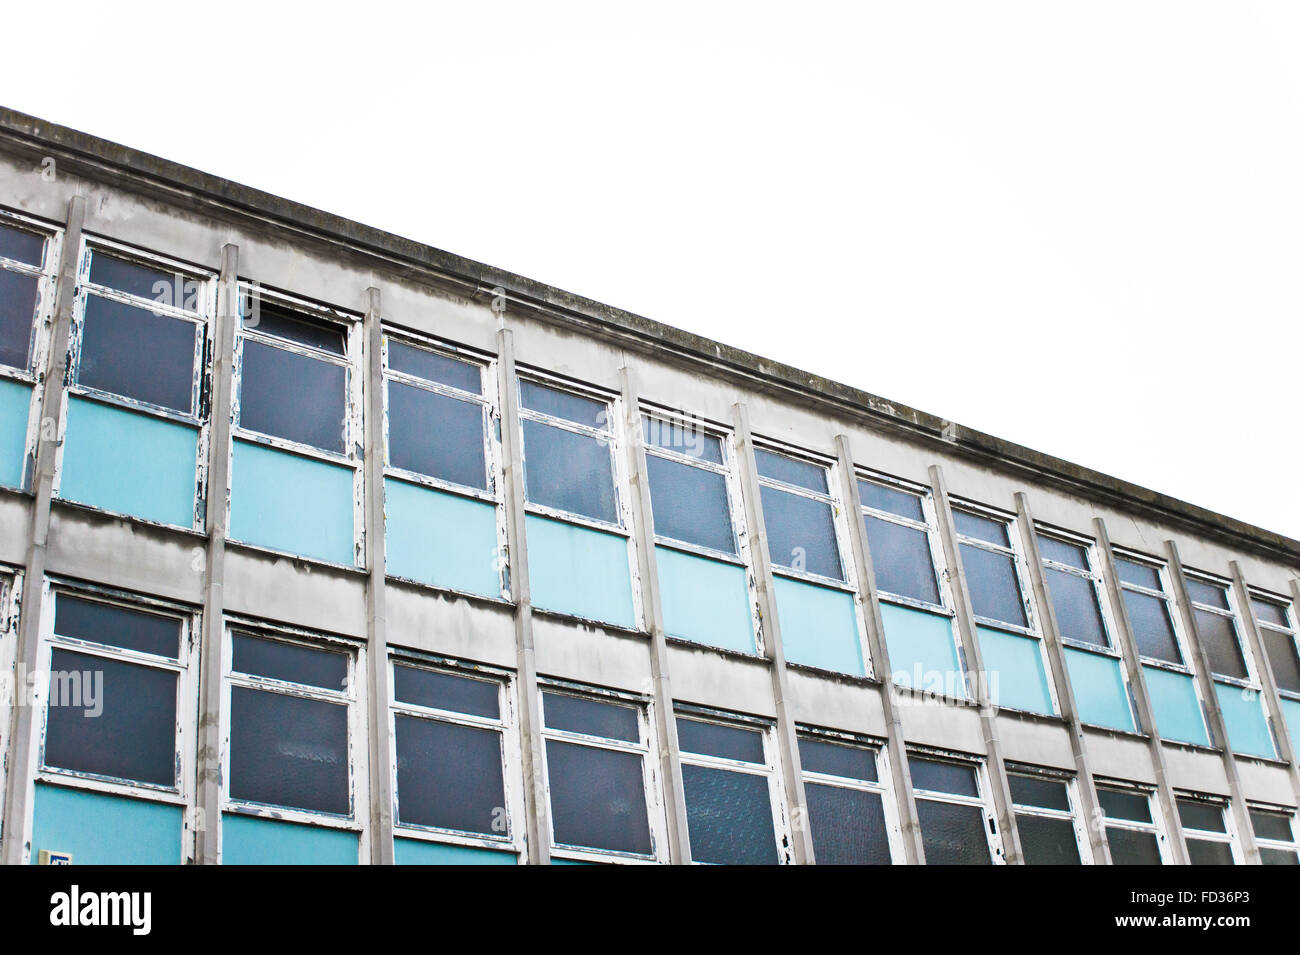 Part of a derelict office building in the UK Stock Photo